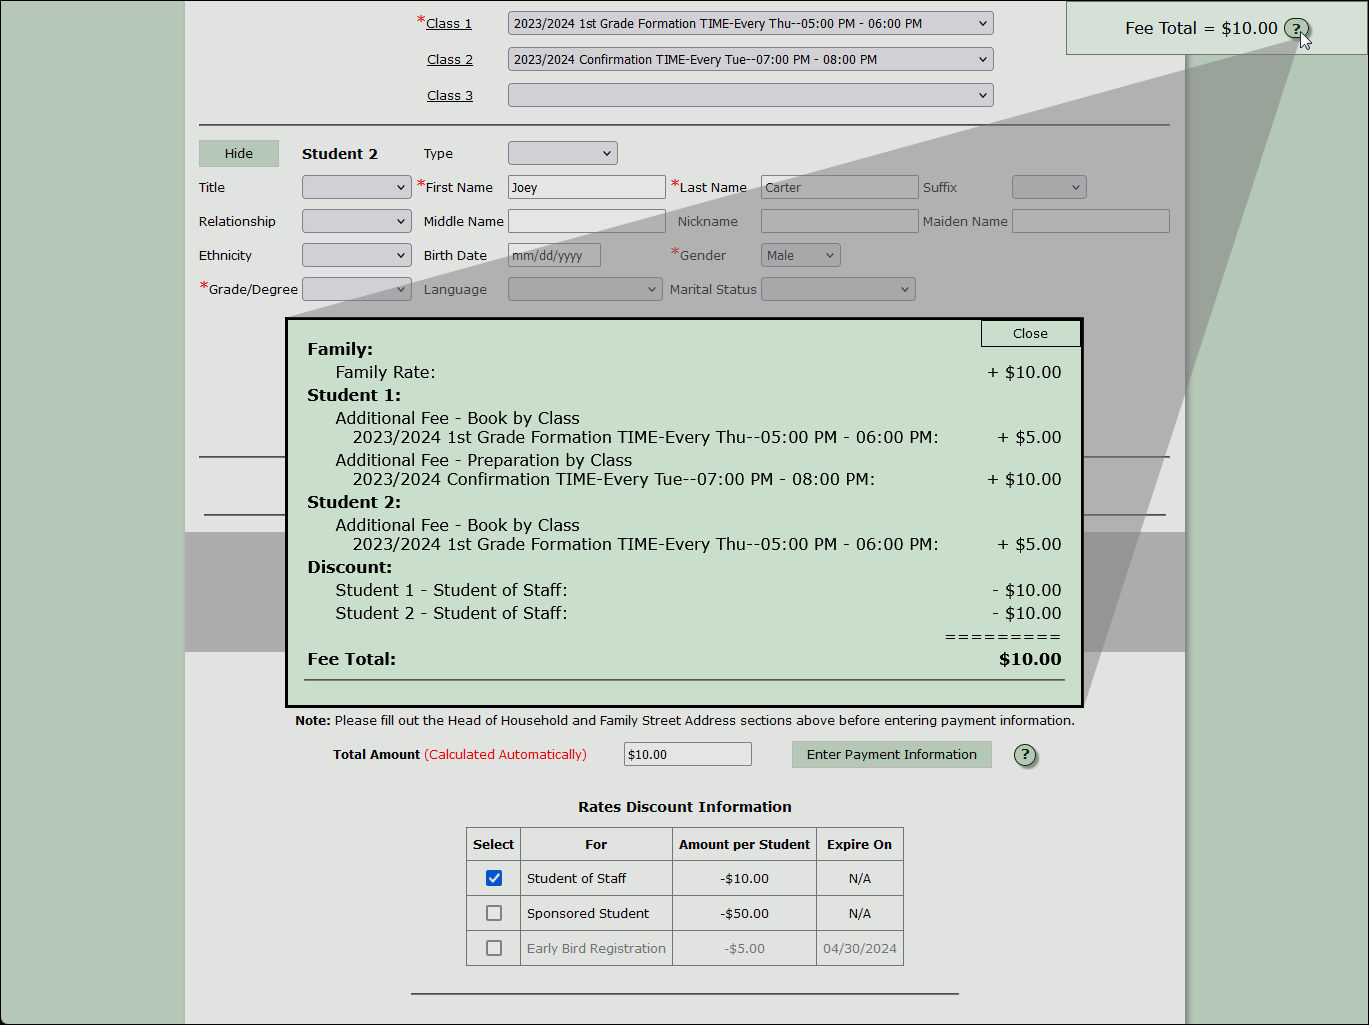 Example showing the Fee Total in the top-right corner of the form, and when clicked, shows the breakdown of each amount for the family, each student, and discounts